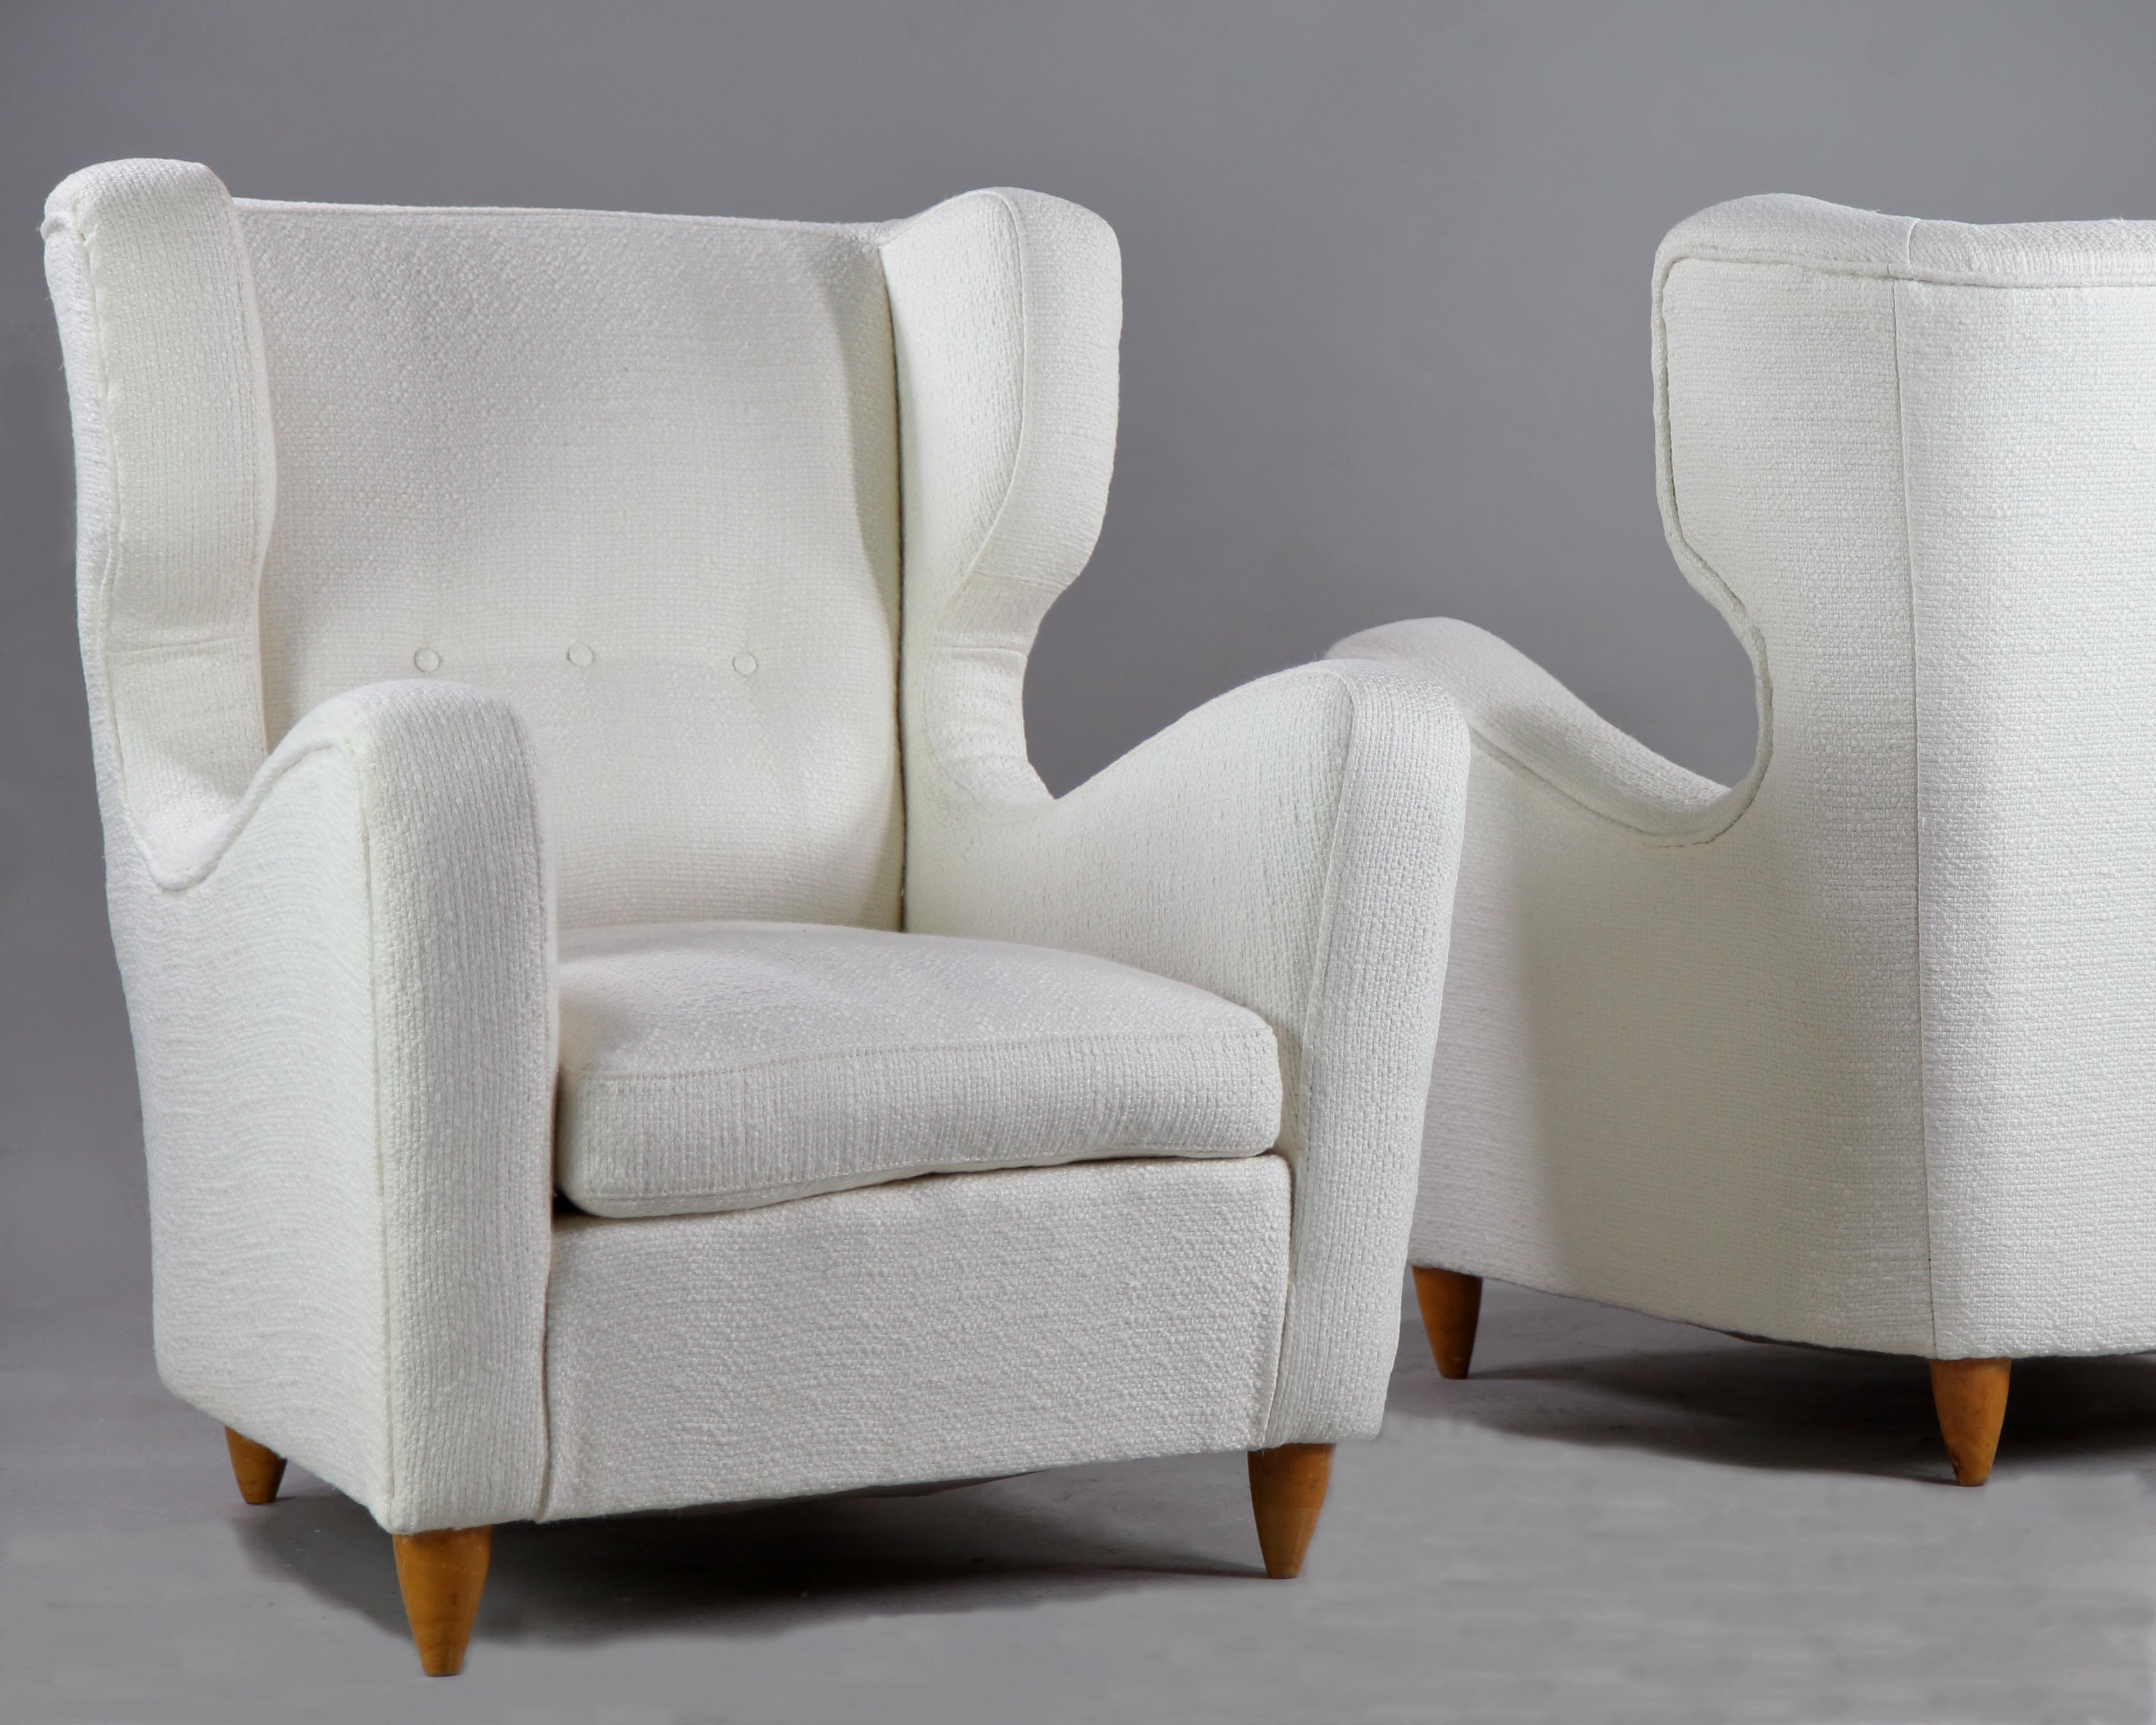 Pair of wingback chairs designed by Melchiorre Bega, Italy 1940s, completely restored and upholstered in Metaphore fabric.